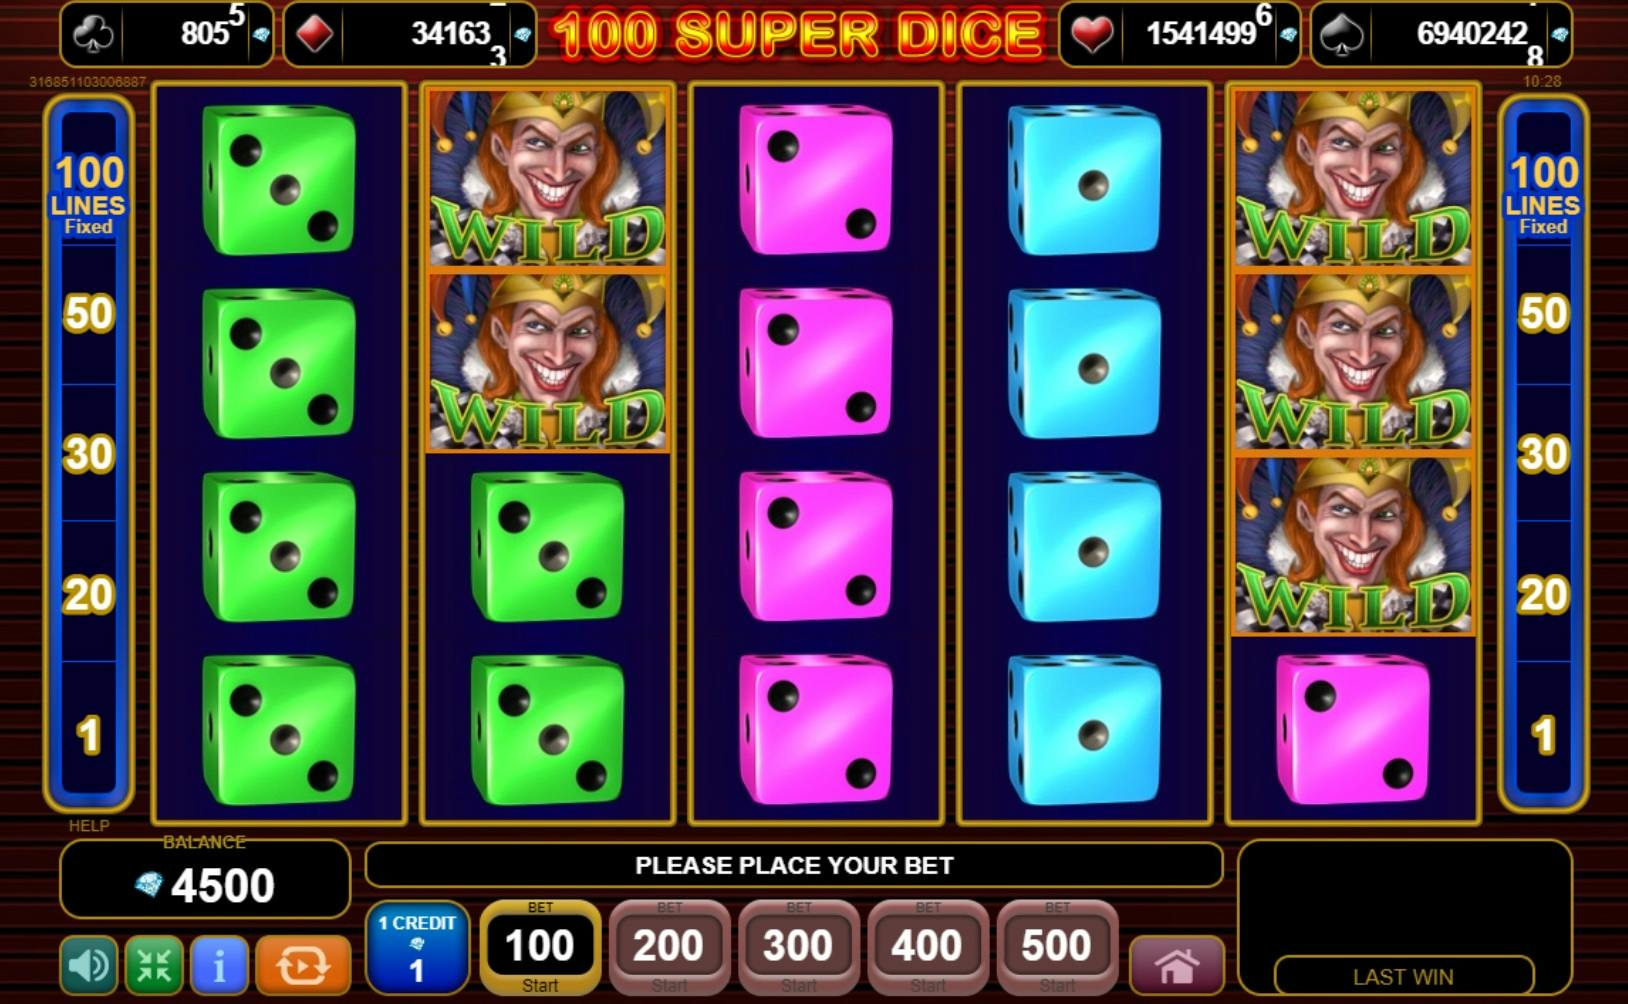 EGT 100 Super Dice Slot on Luckygames